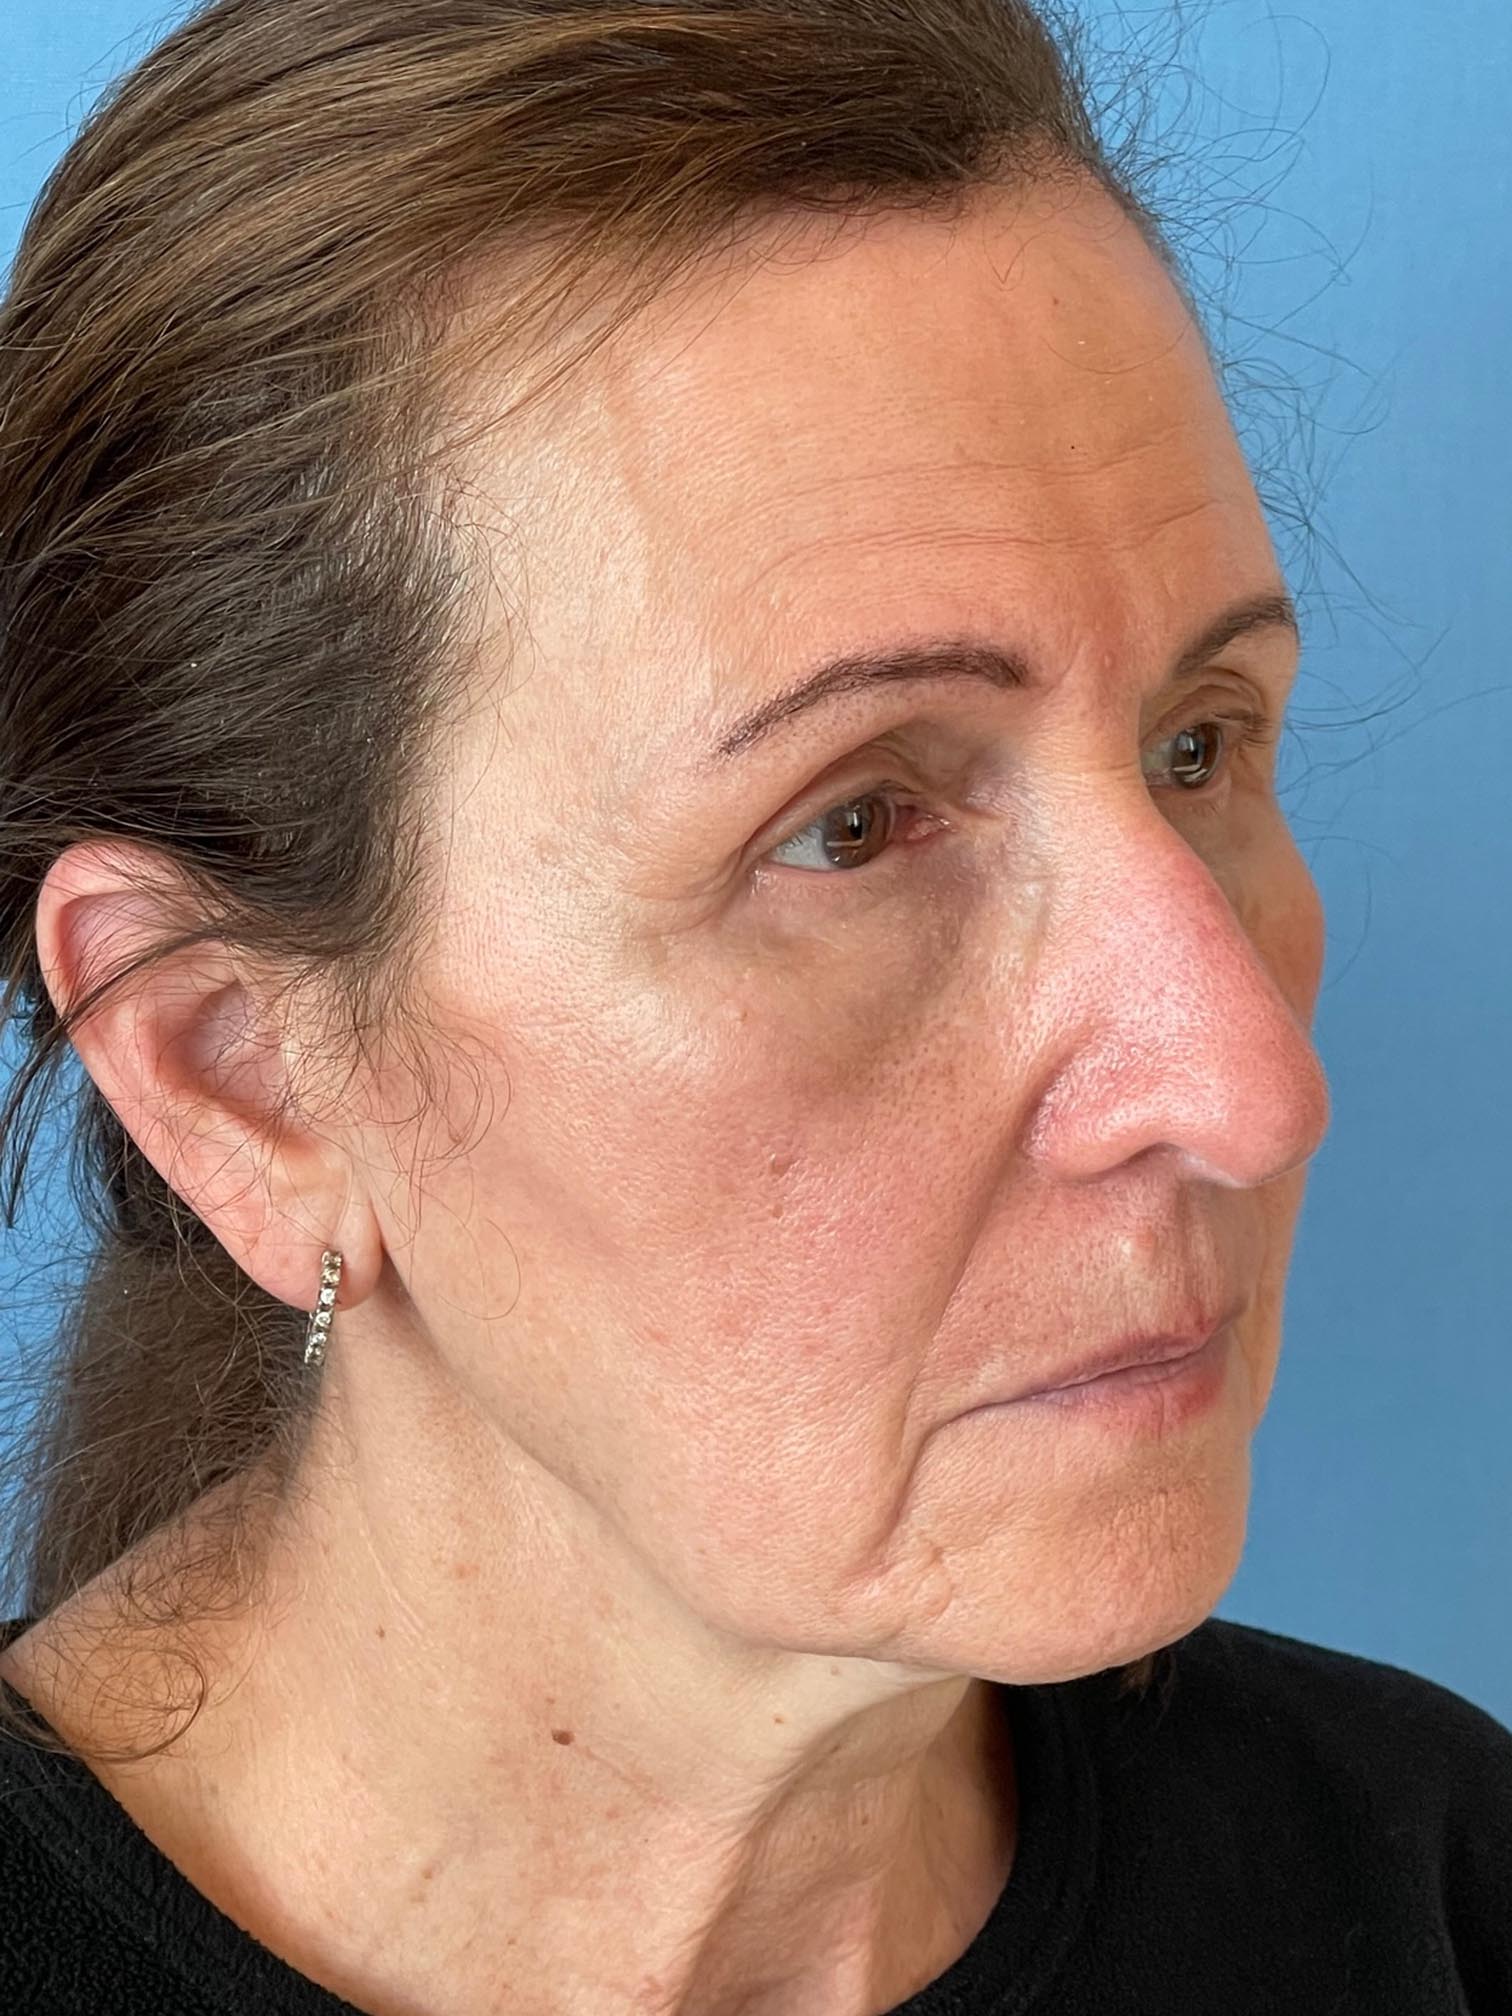 Photo of the patient’s face after the Blepharoplasty surgery. Patient 4 - Set 3